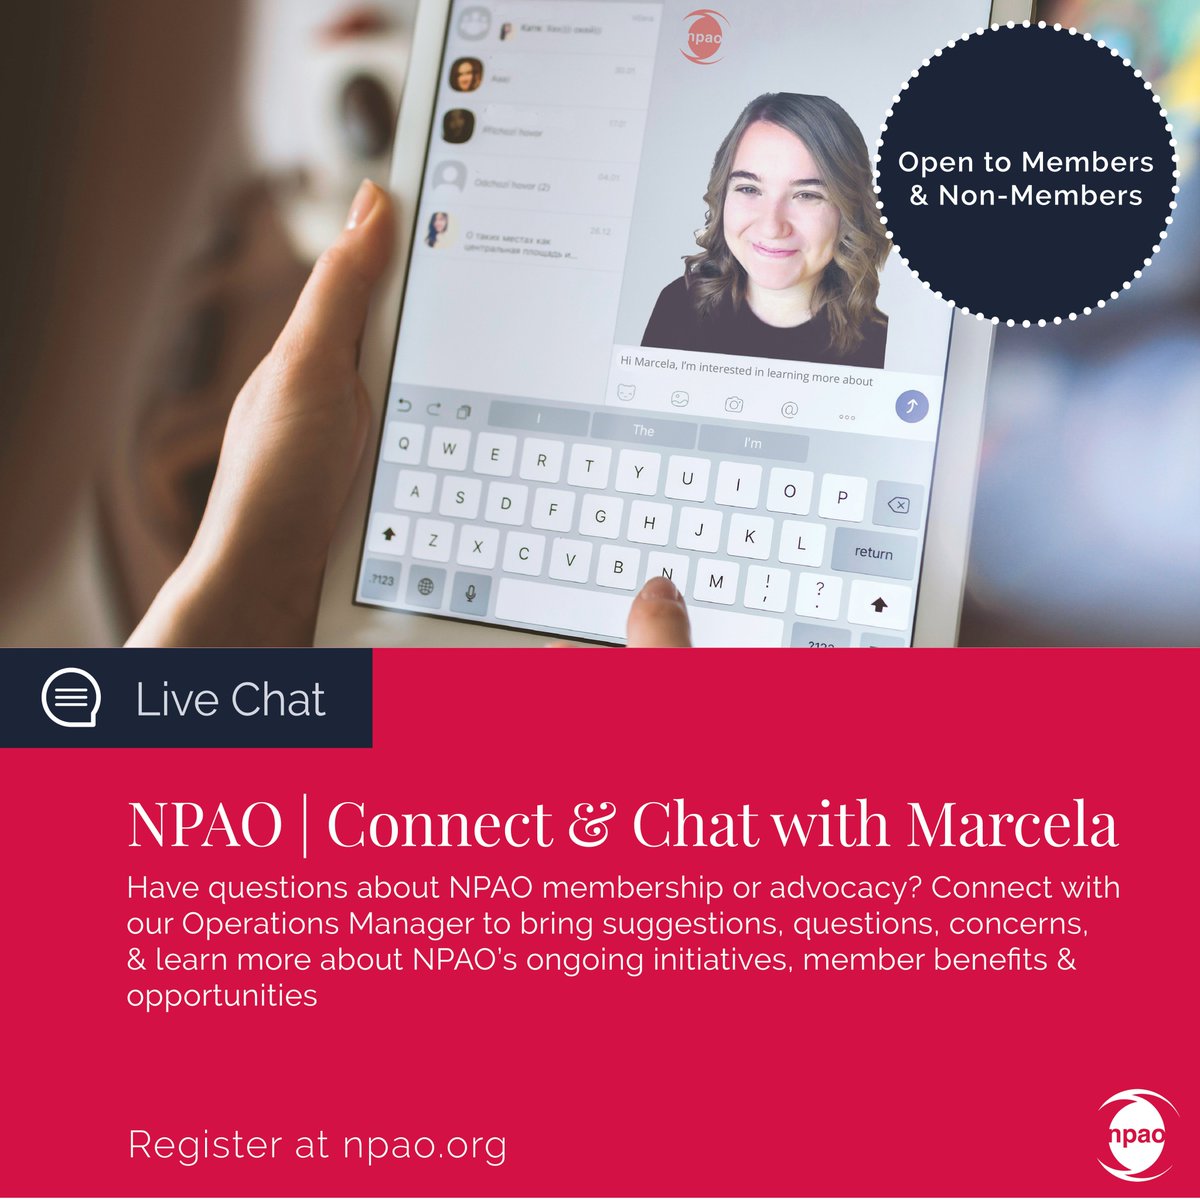 Join us on April 12 for 'Connect & Chat with Marcela' from 12:00-1:00 PM. Have questions about membership or advocacy? Bring your suggestions, concerns, and learn about ongoing initiatives and benefits. Open agenda! Don't miss out: npao.org/calendar.../np…